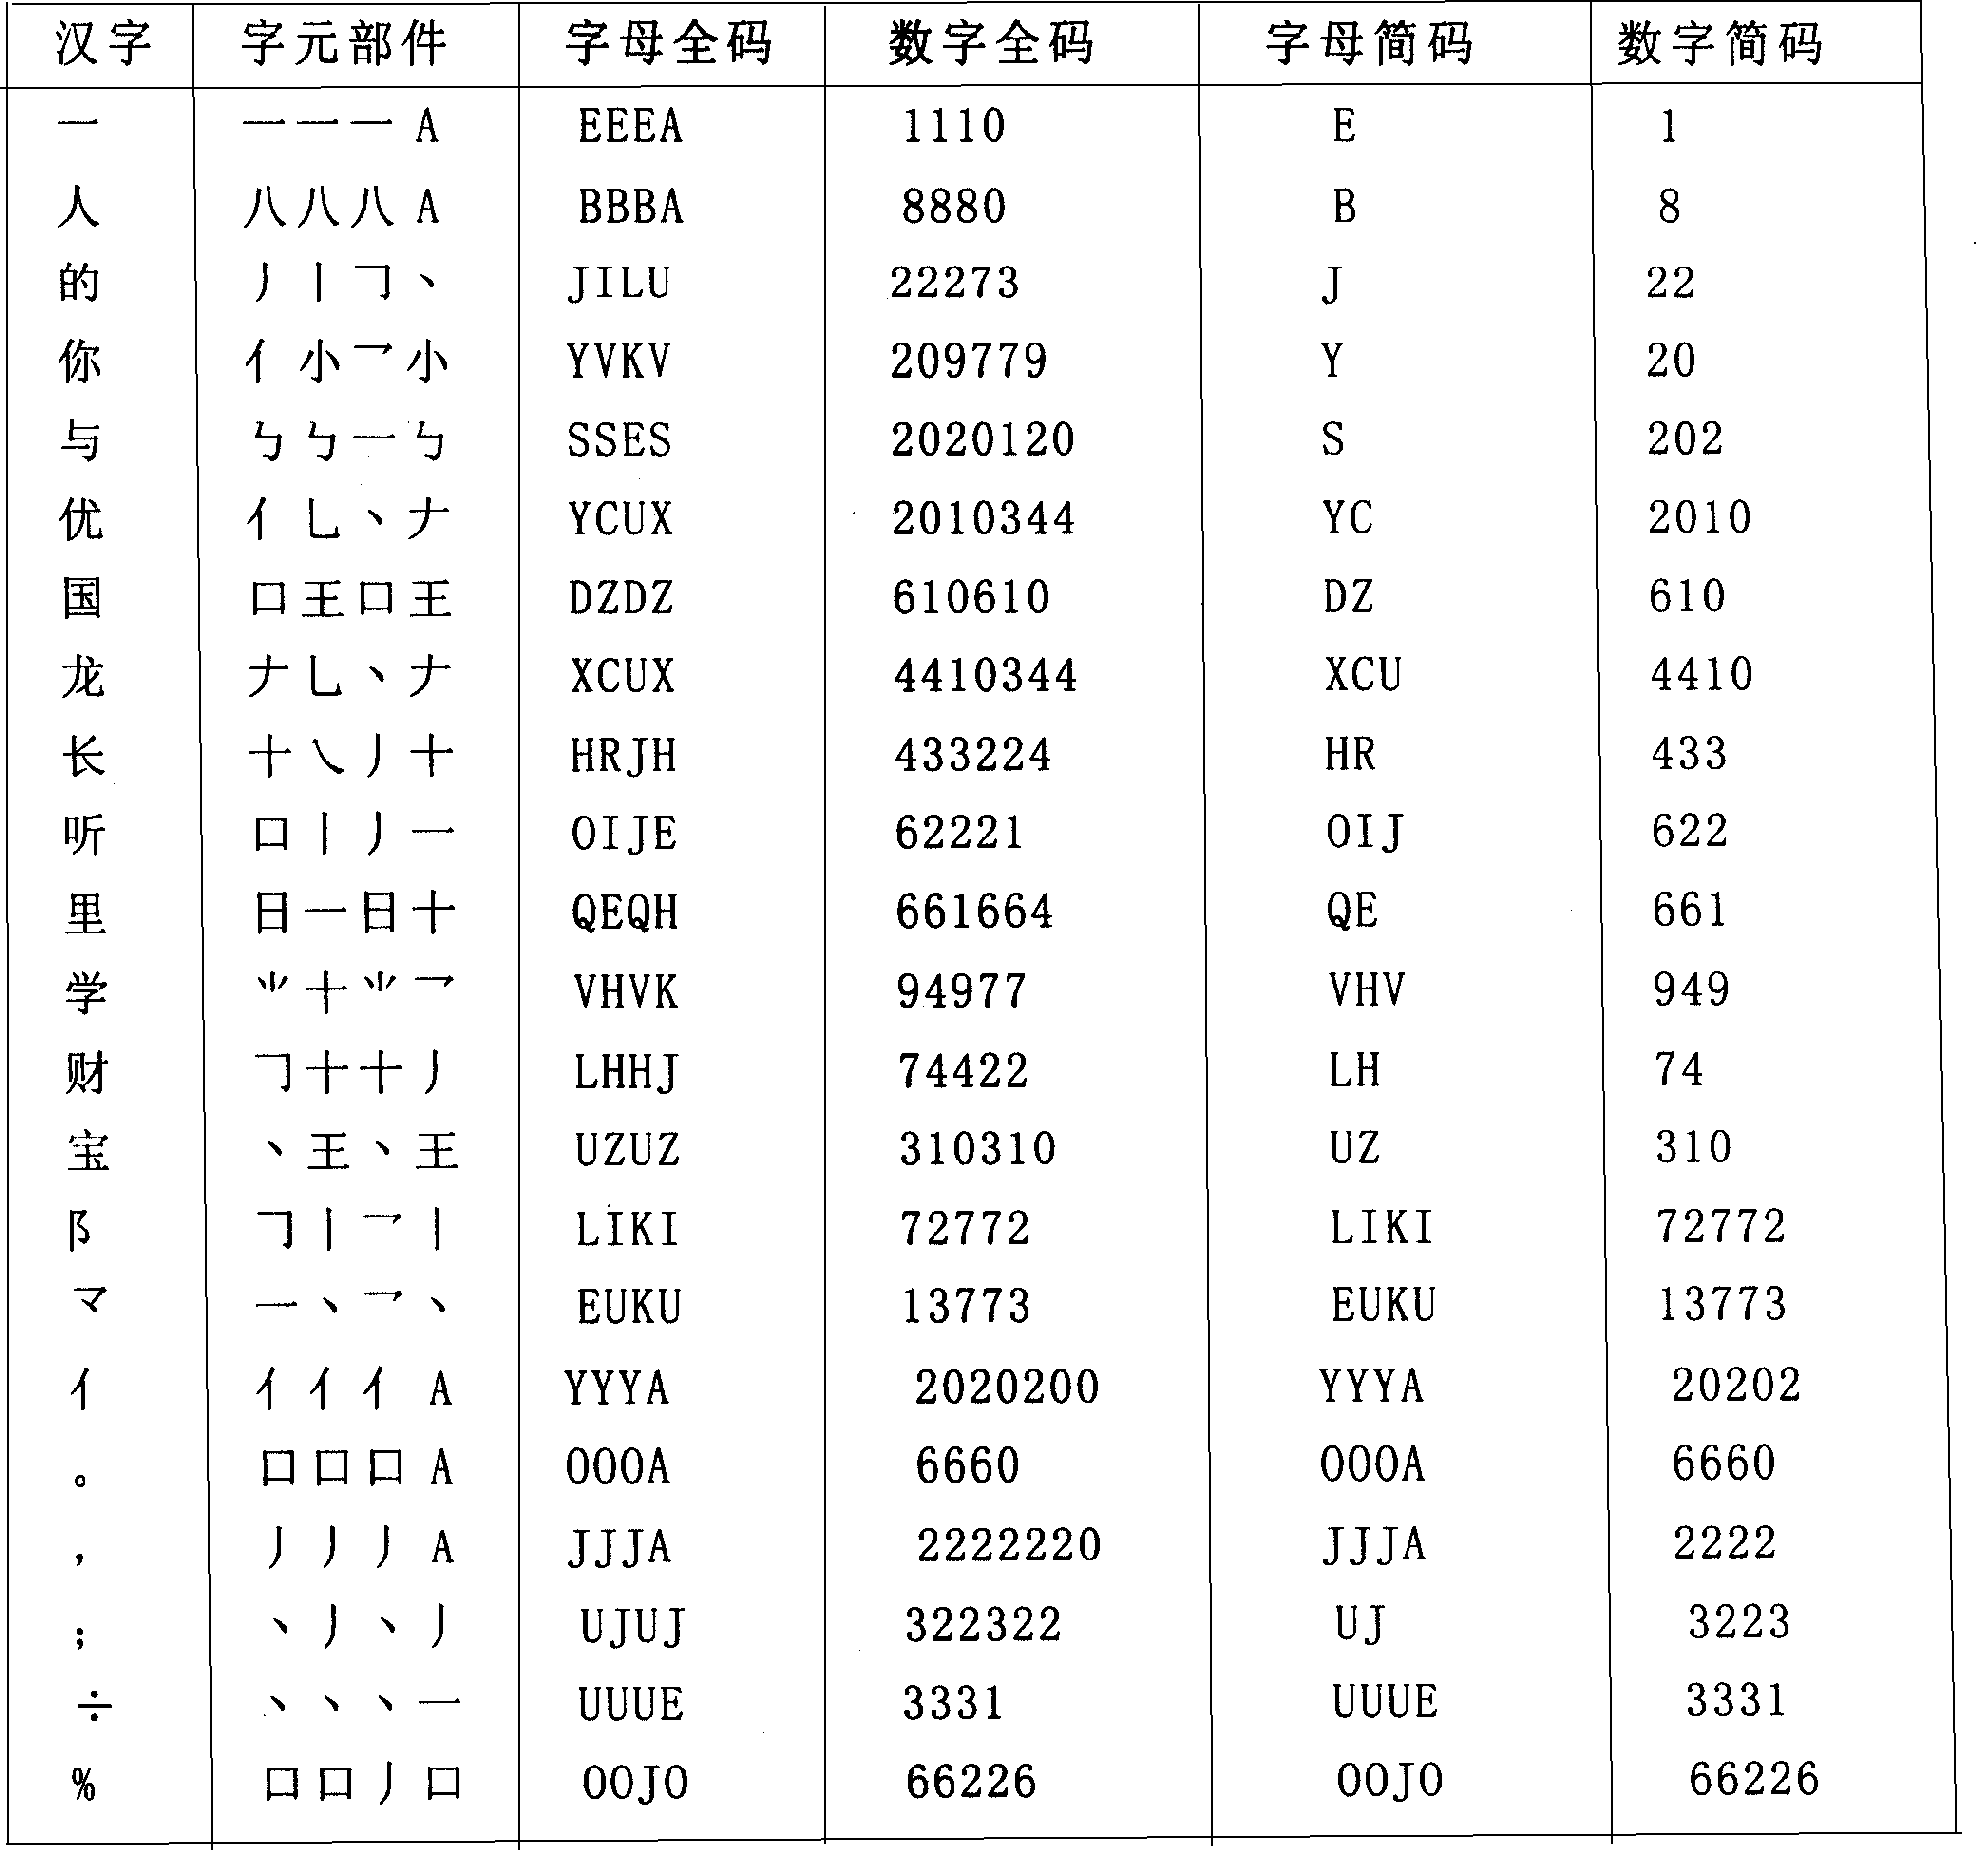 Multi-element coding method for describing chinese contour feature based on Chinese character mode